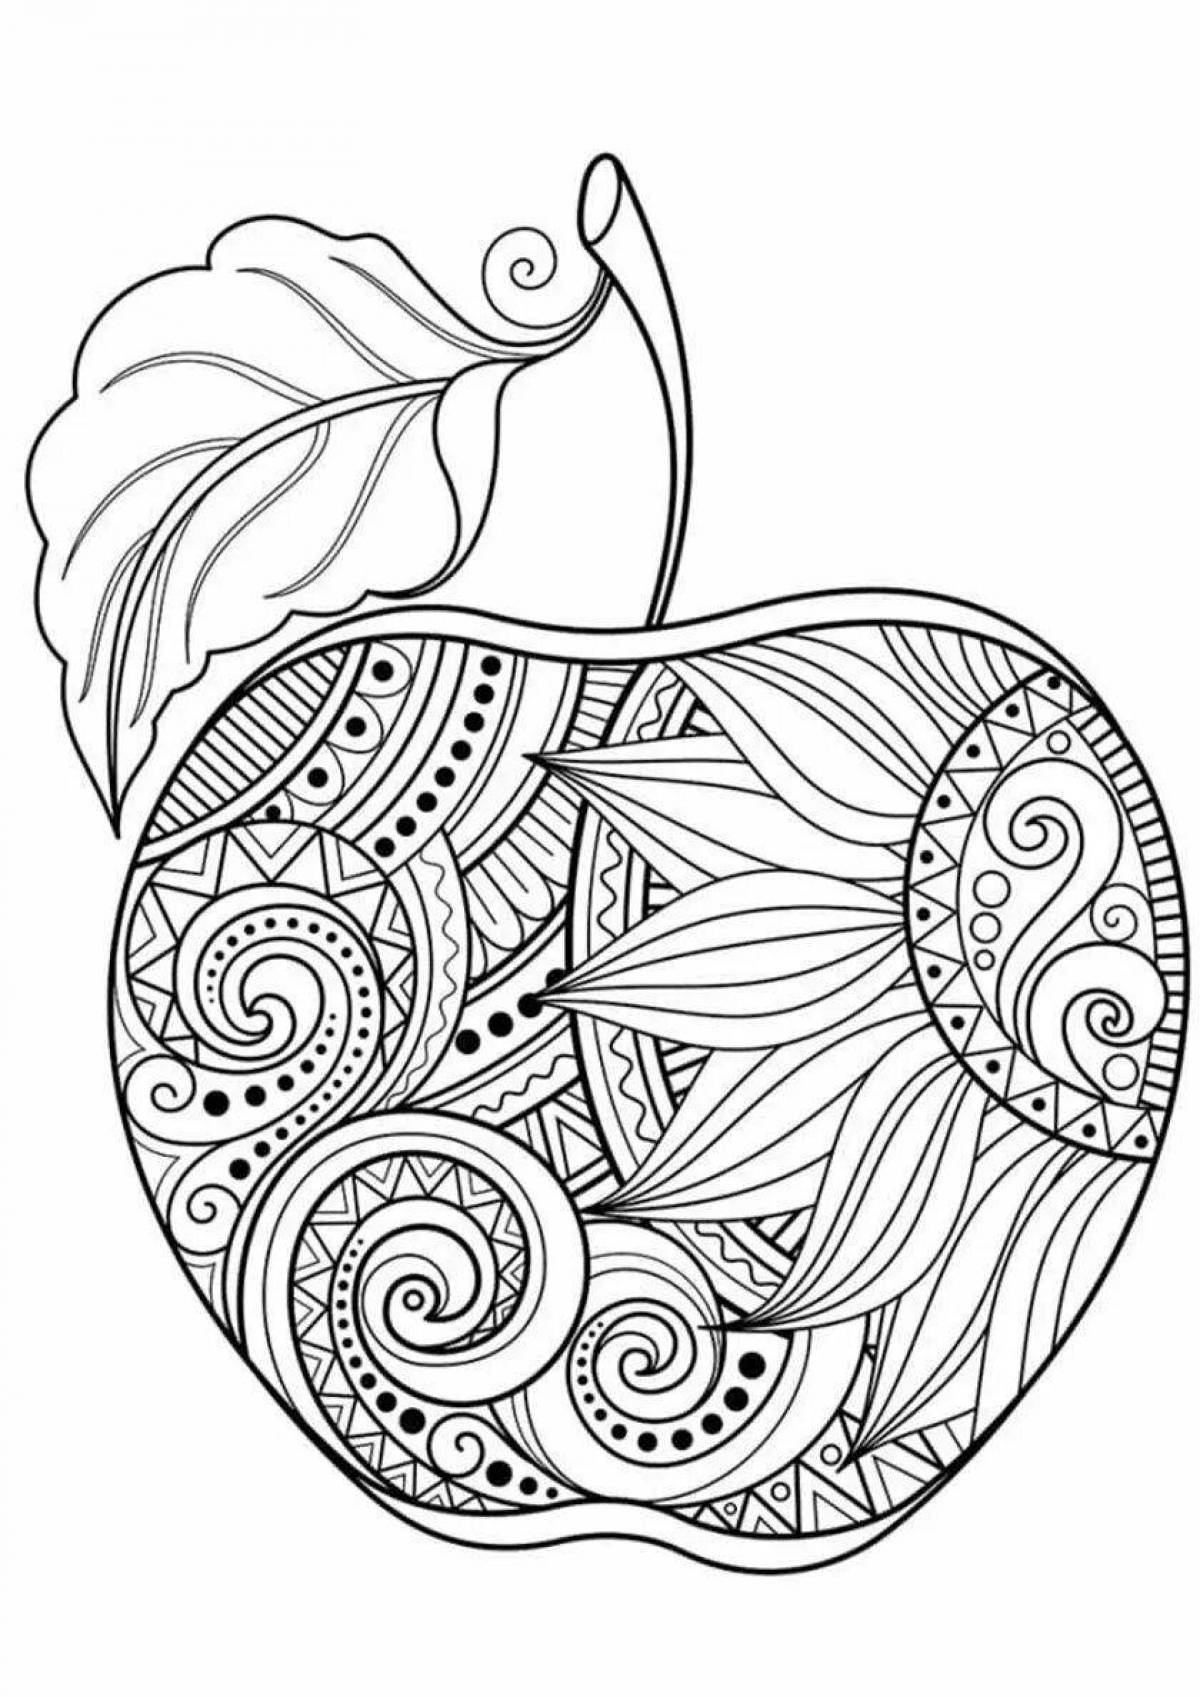 Color-happy coloring page for beginners